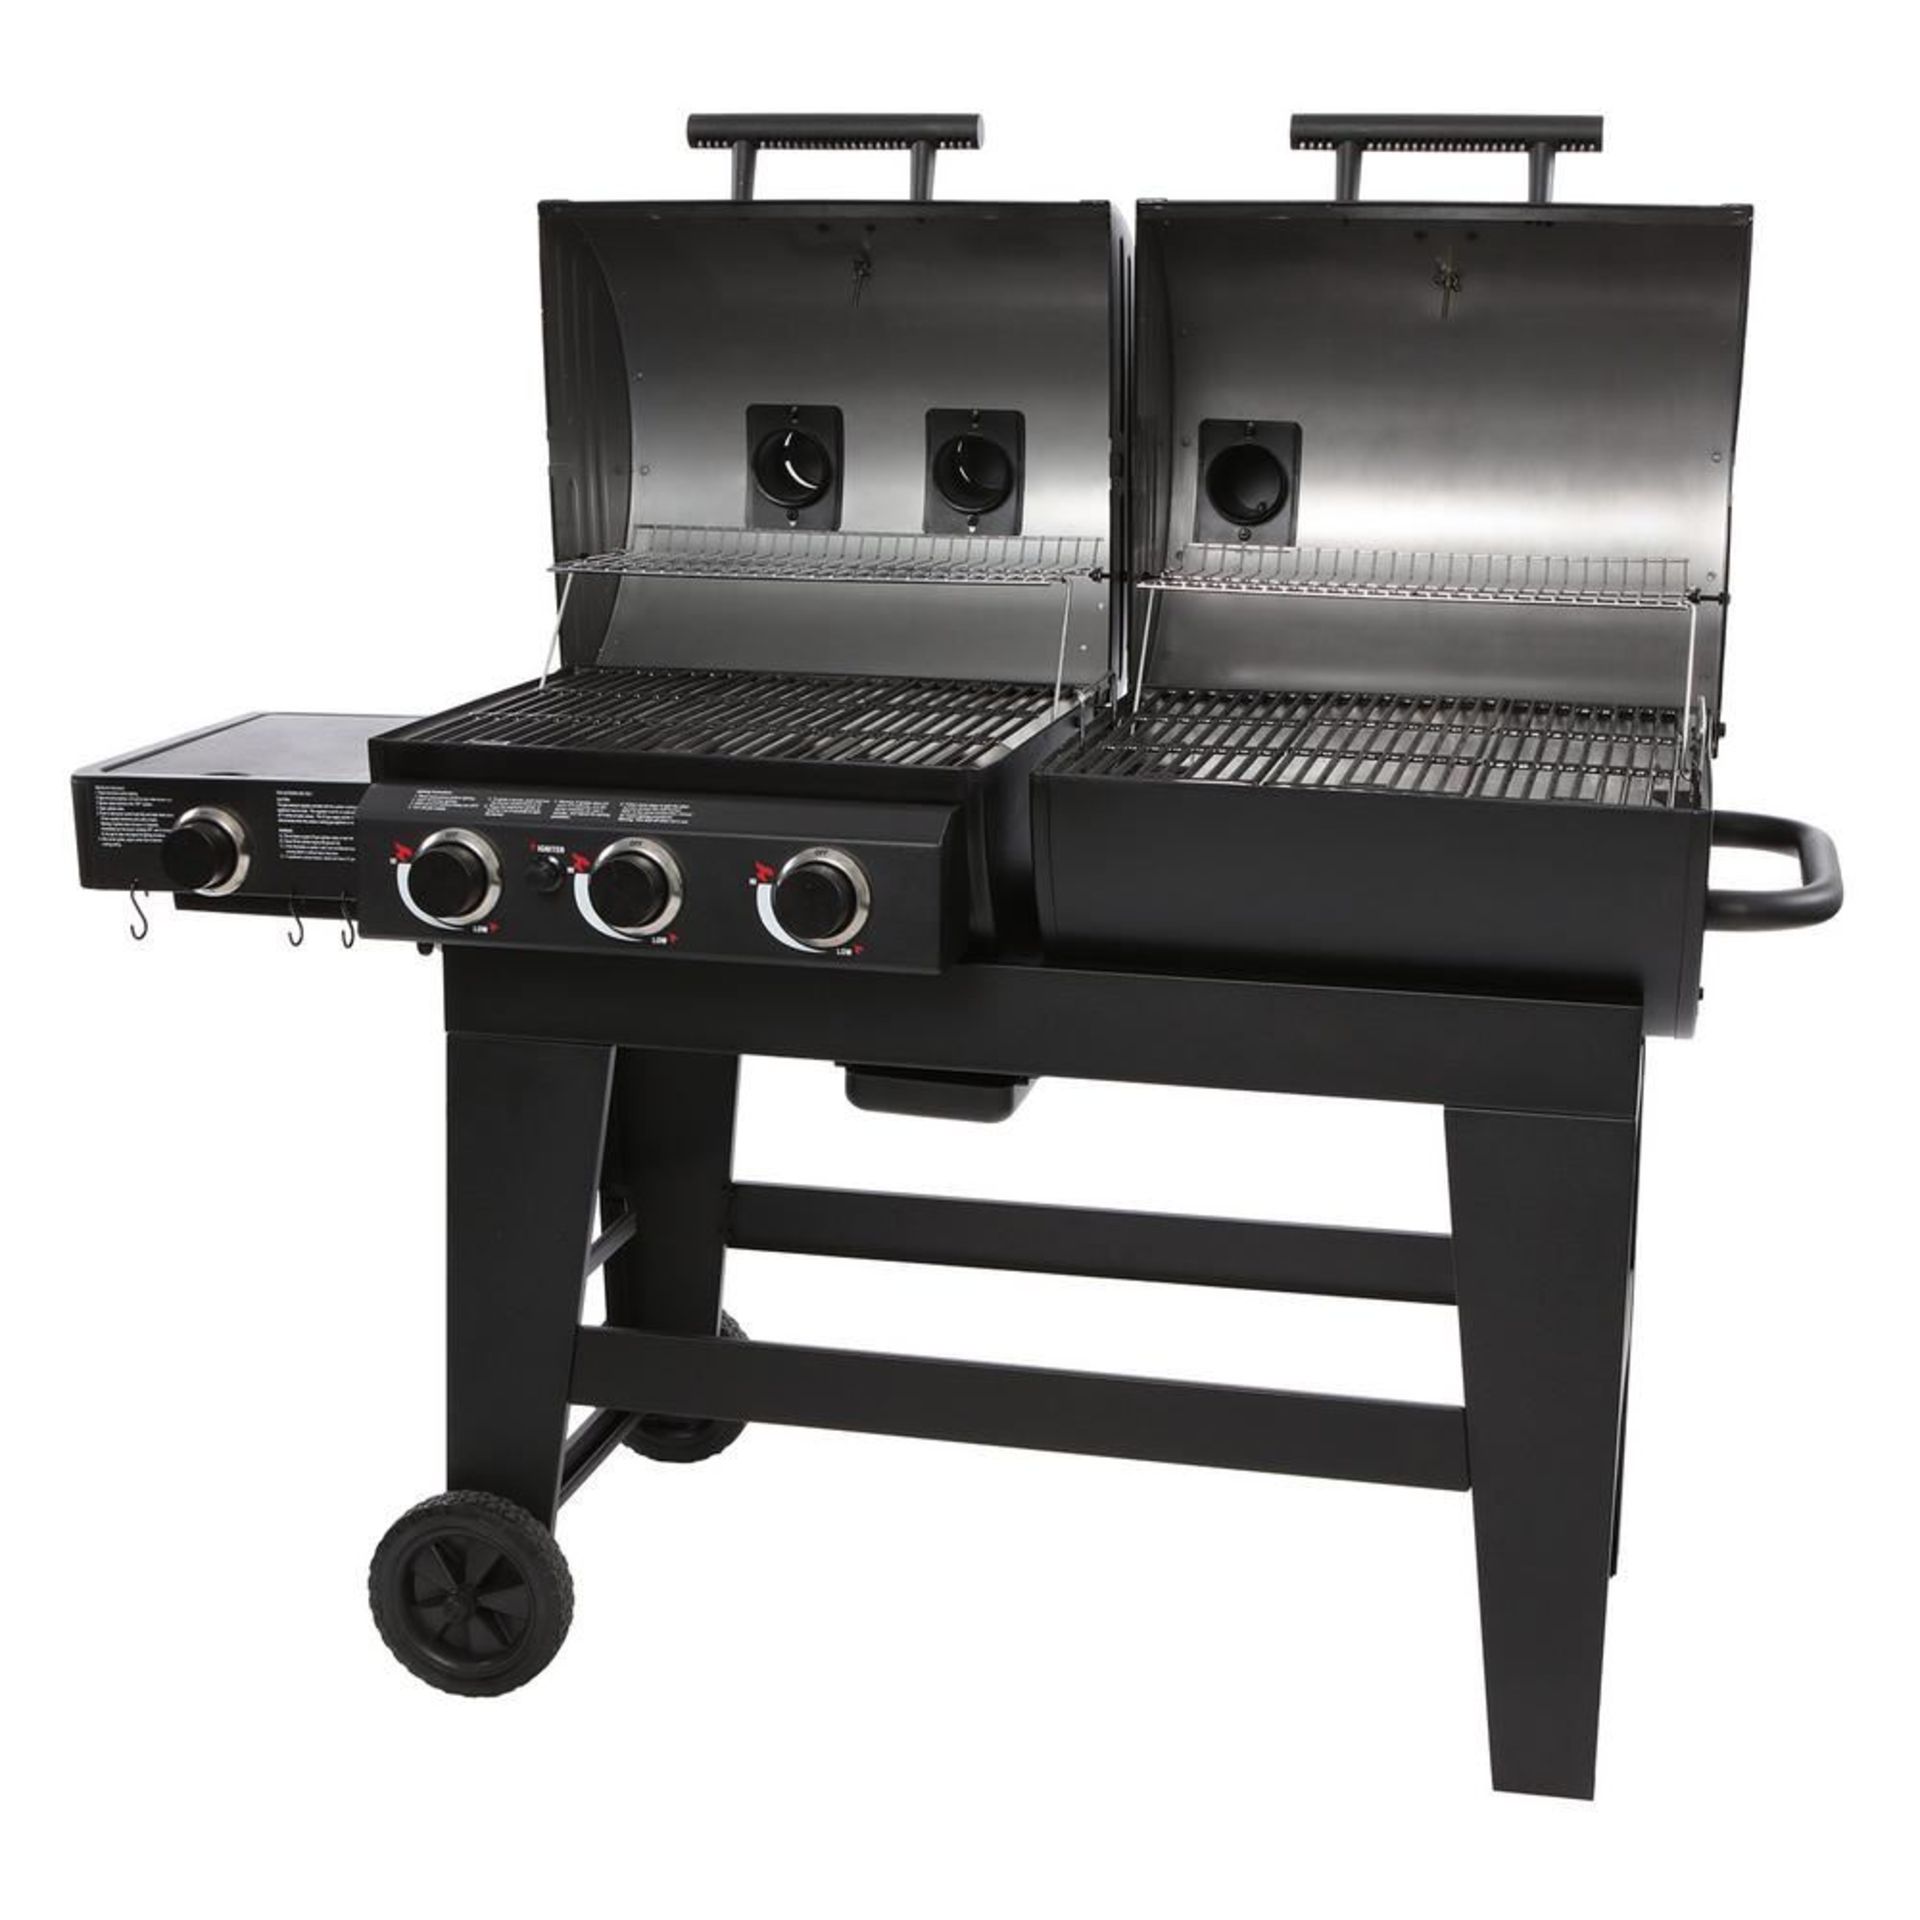 Char-Griller 3-Burner Gas and Charcoal Grill in Black - Image 2 of 3